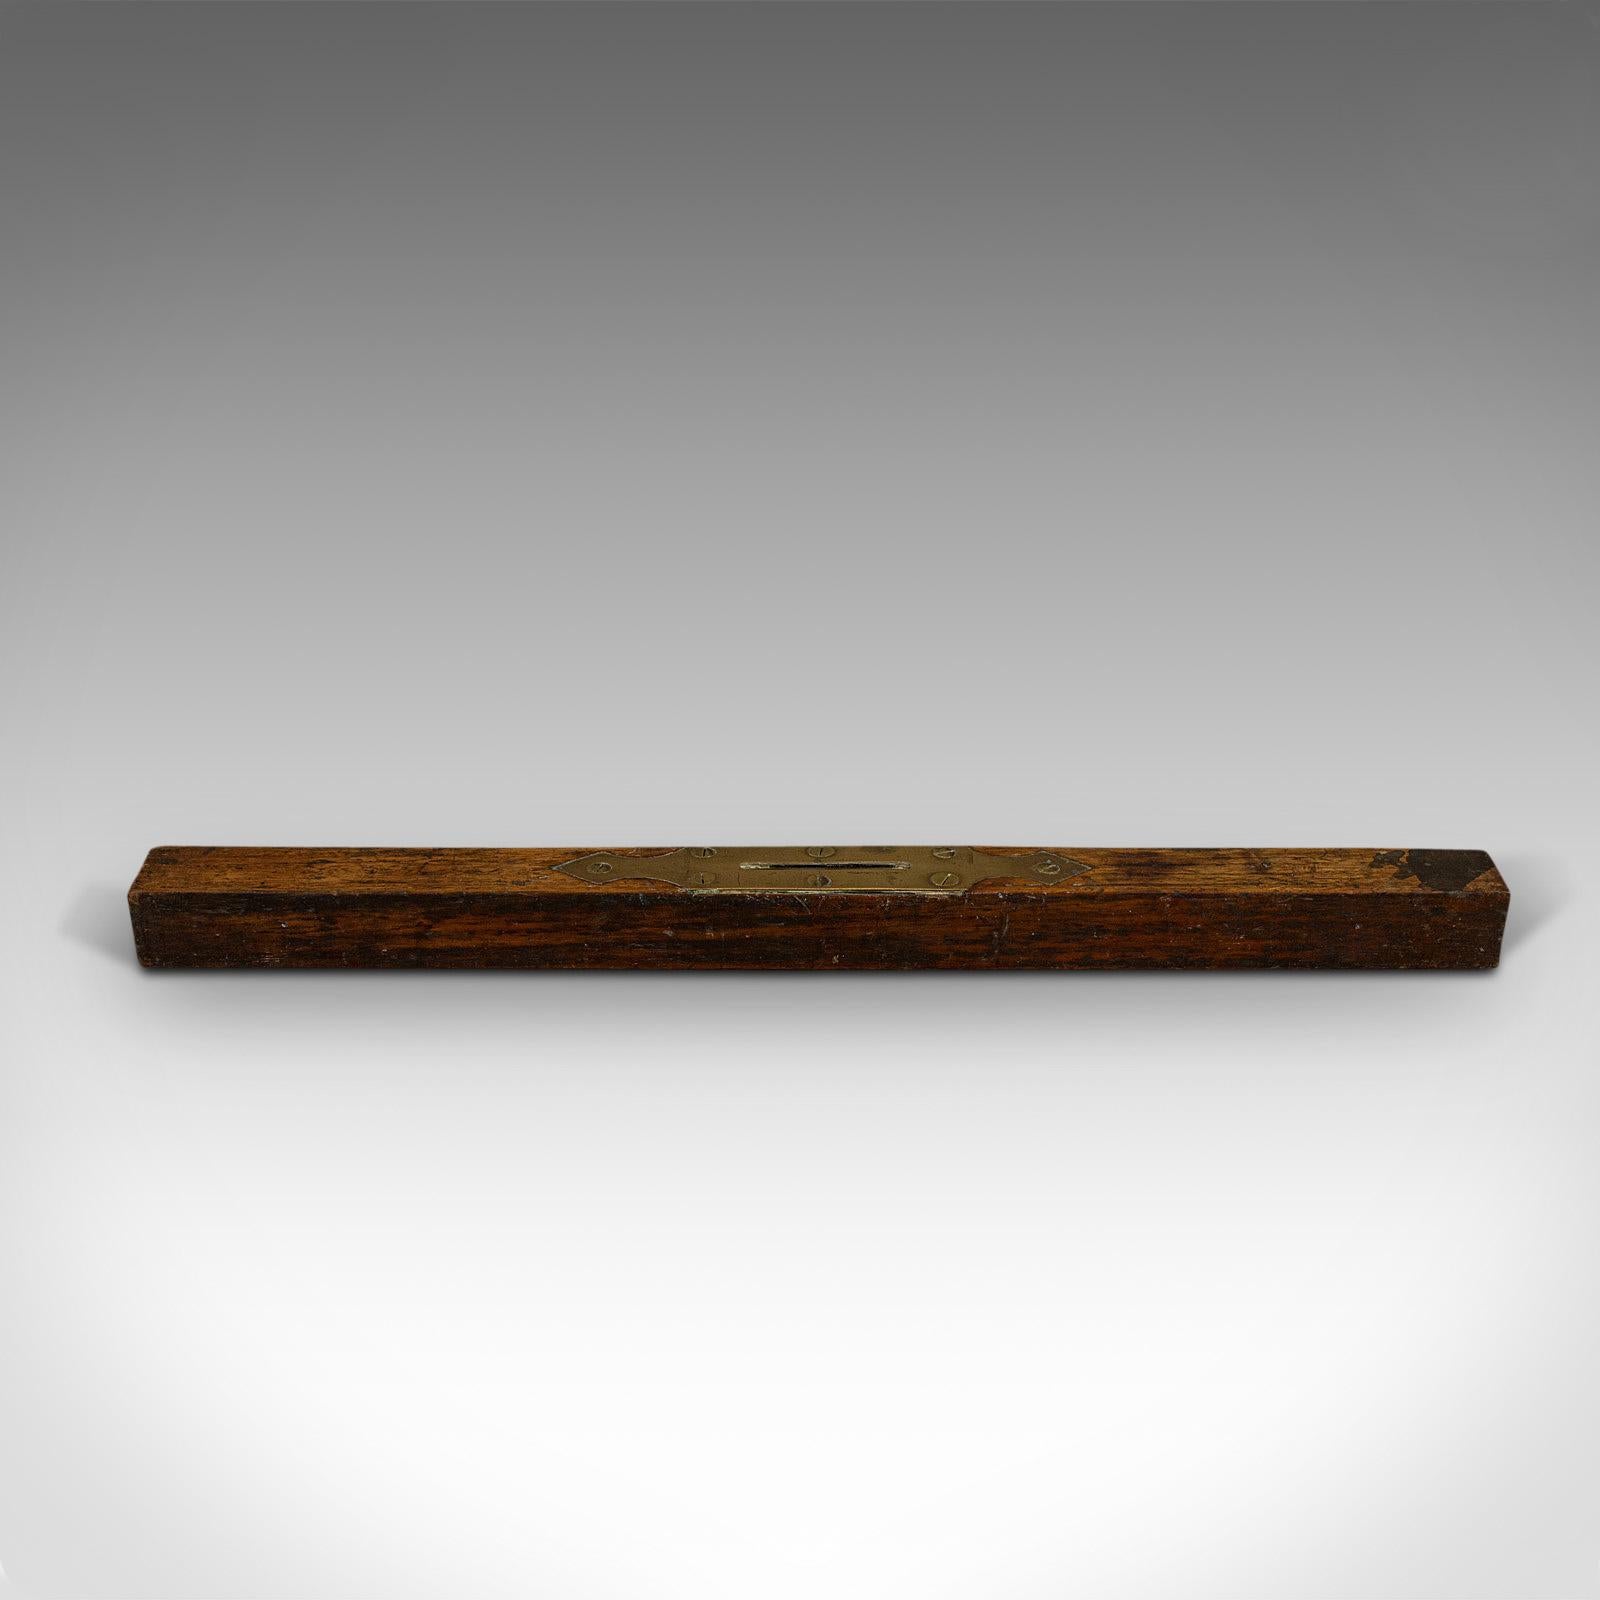 This is a large antique spirit level. An English, mahogany and brass craftsman's instrument, dating to the William IV period, circa 1830.

Charming, early 19th century instrument
Displays a desirable aged patina
Mahogany body shows Fine grain